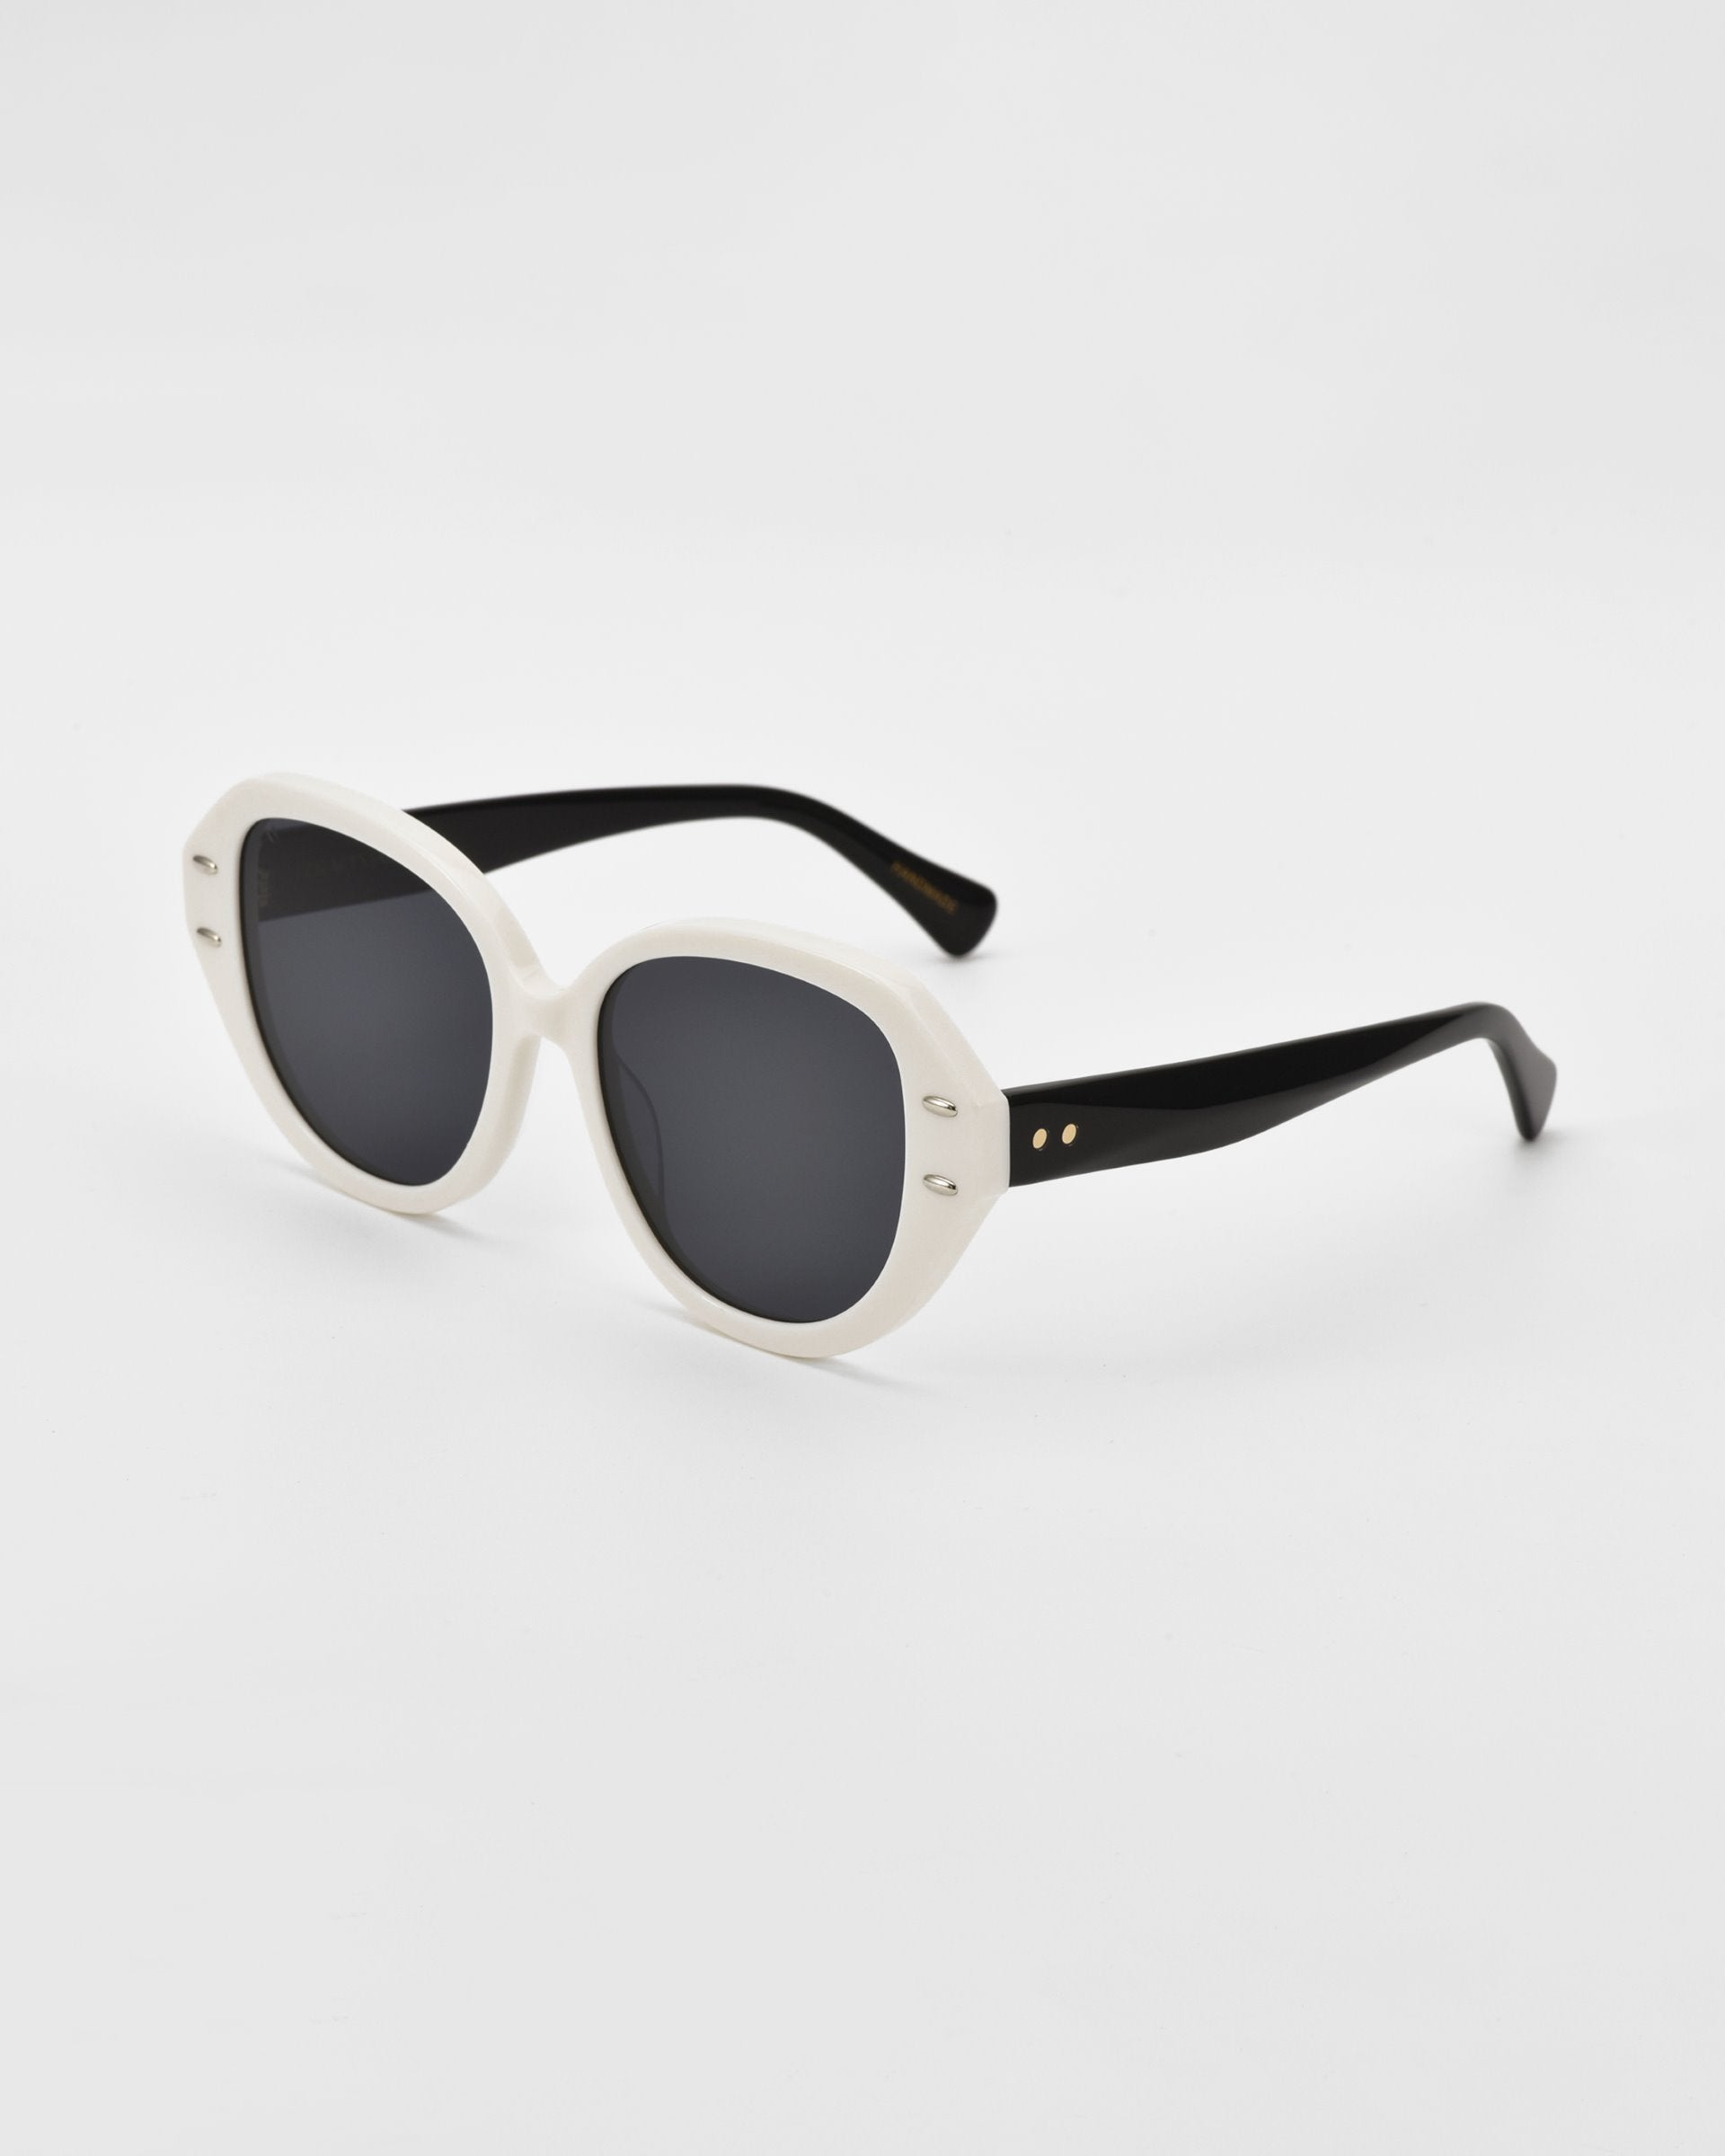 A pair of stylish cat-eye sunglasses with thick white, plant-based acetate frames and dark lenses. The temples are black, adding a contrasting touch to the design. The frames have a rounded, slightly oversized shape, giving them a modern and chic appearance. These are the Mirage sunglasses by For Art&#39;s Sake®.